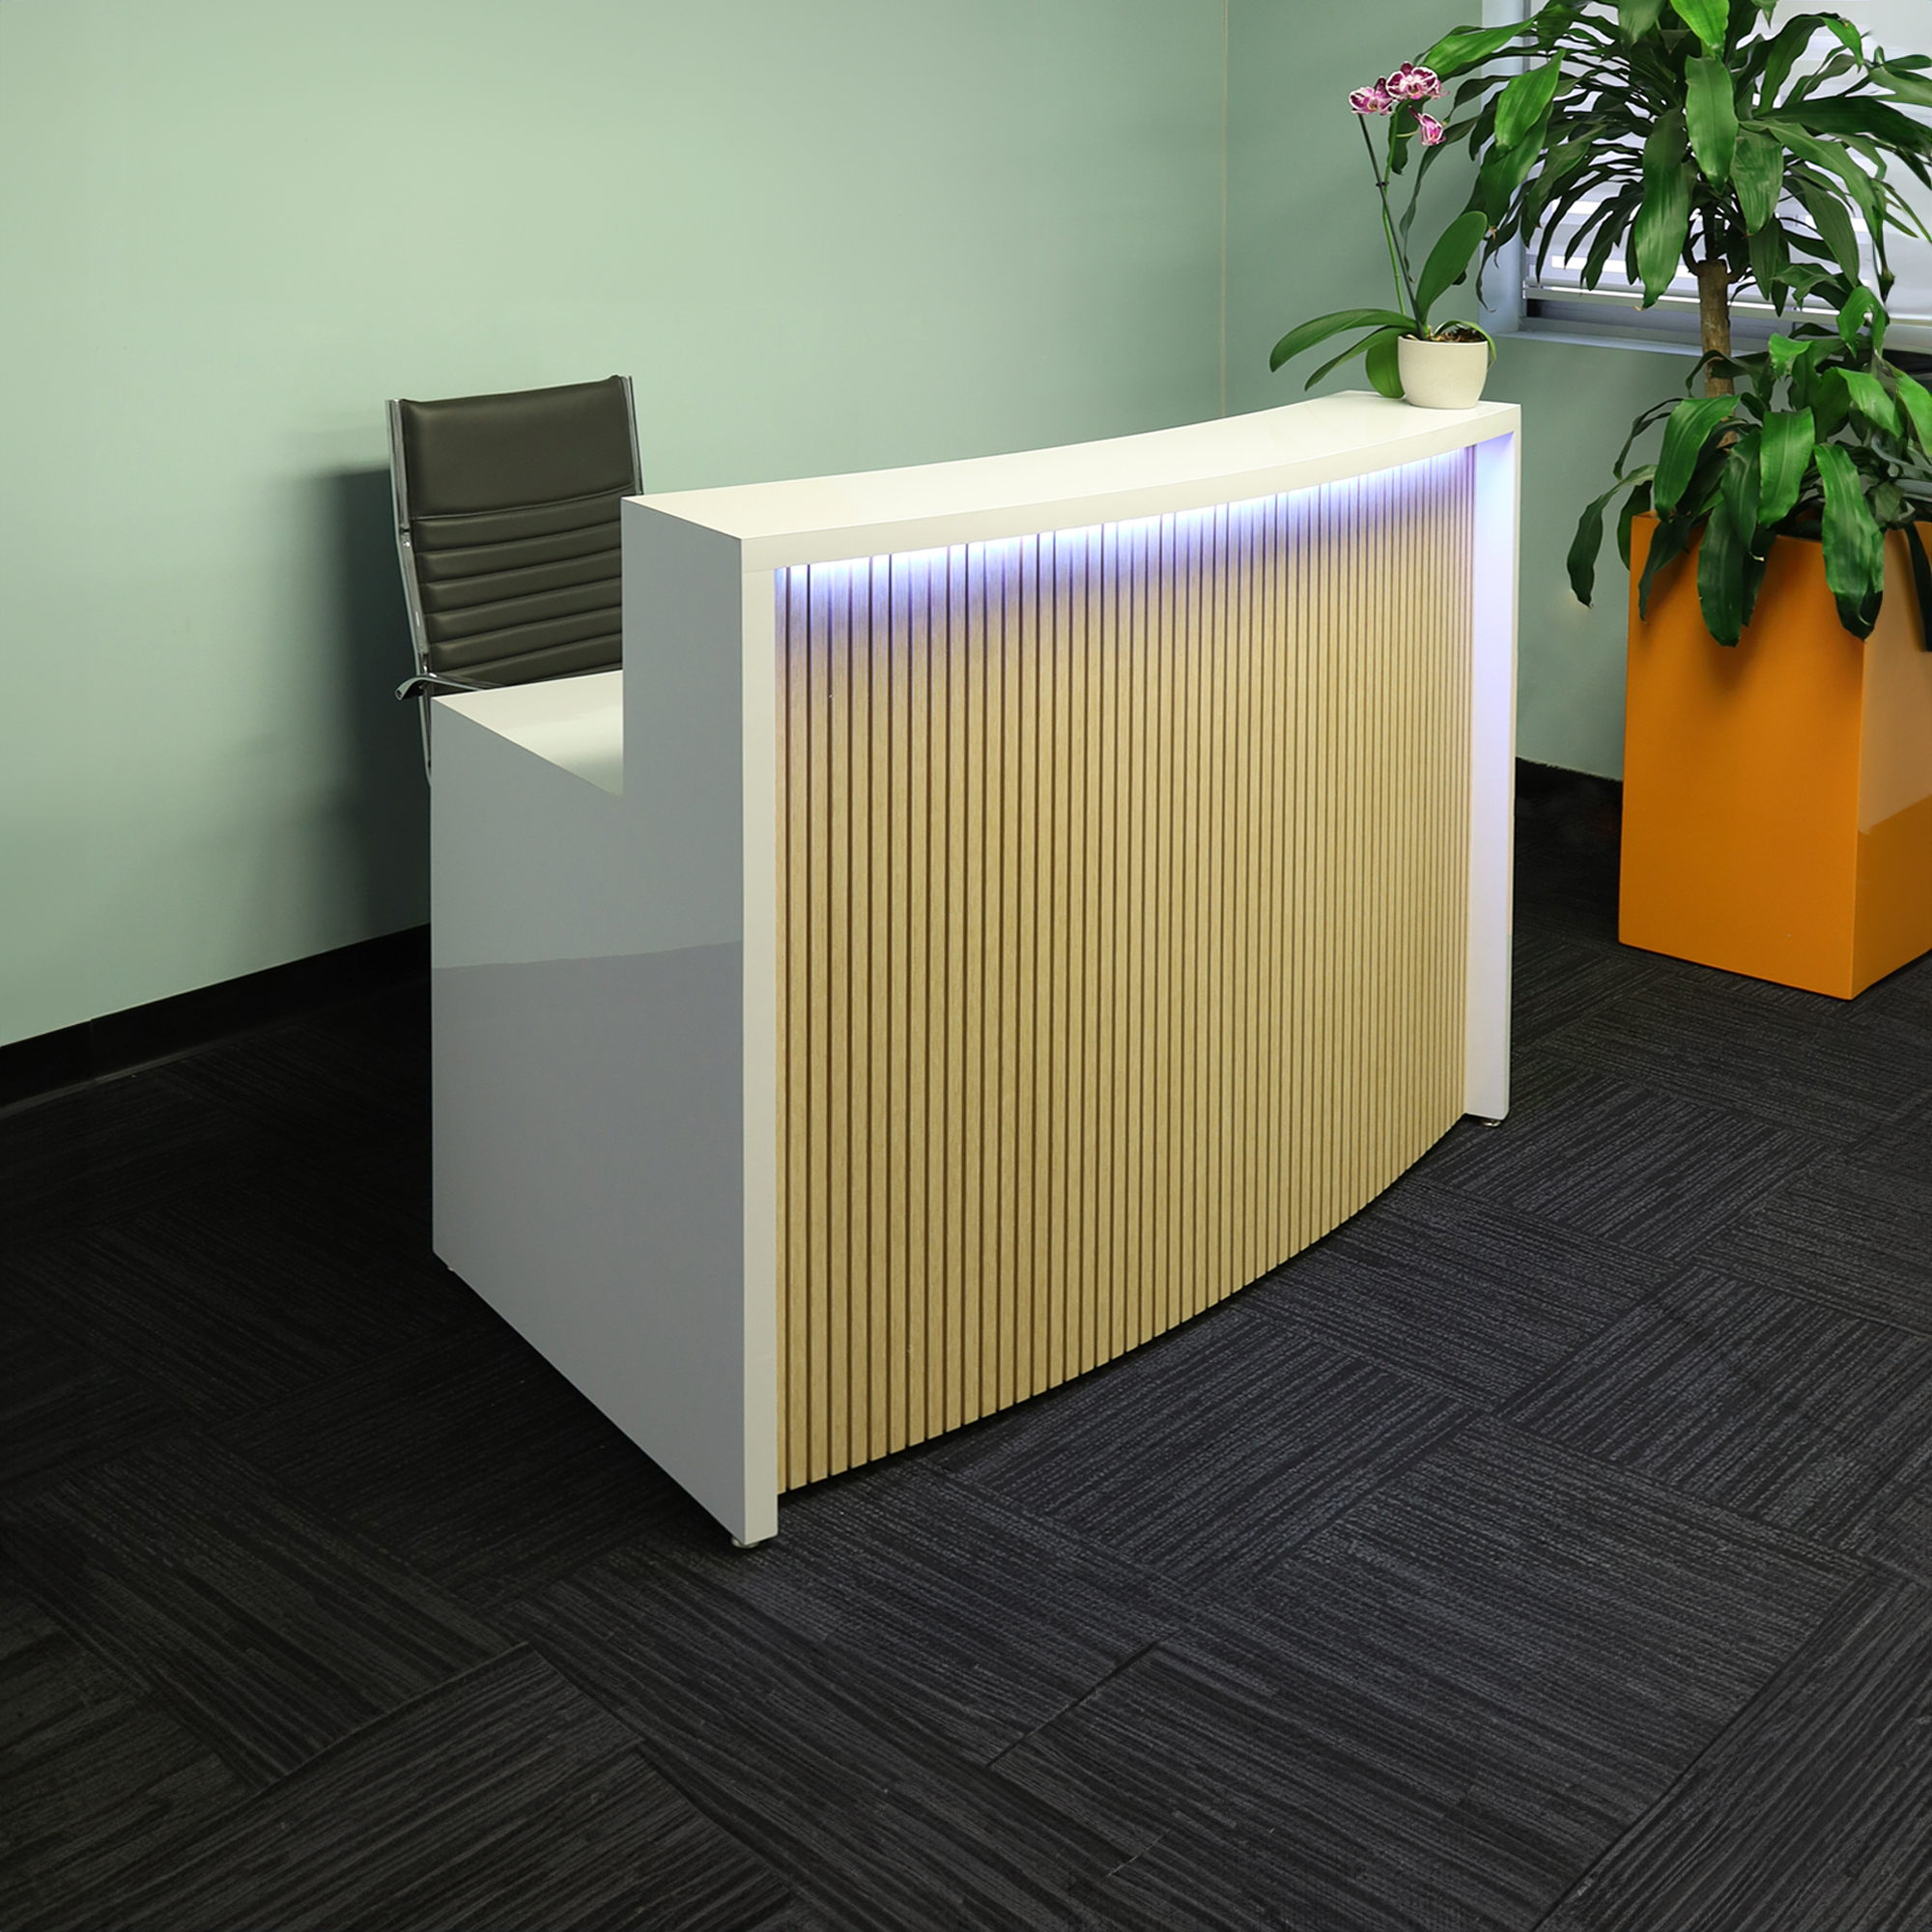 72-inch Seattle X1 Custom Reception Desk in white gloss laminate desk and maple tambour on curved front panel, with multi-colored LED, shown here.